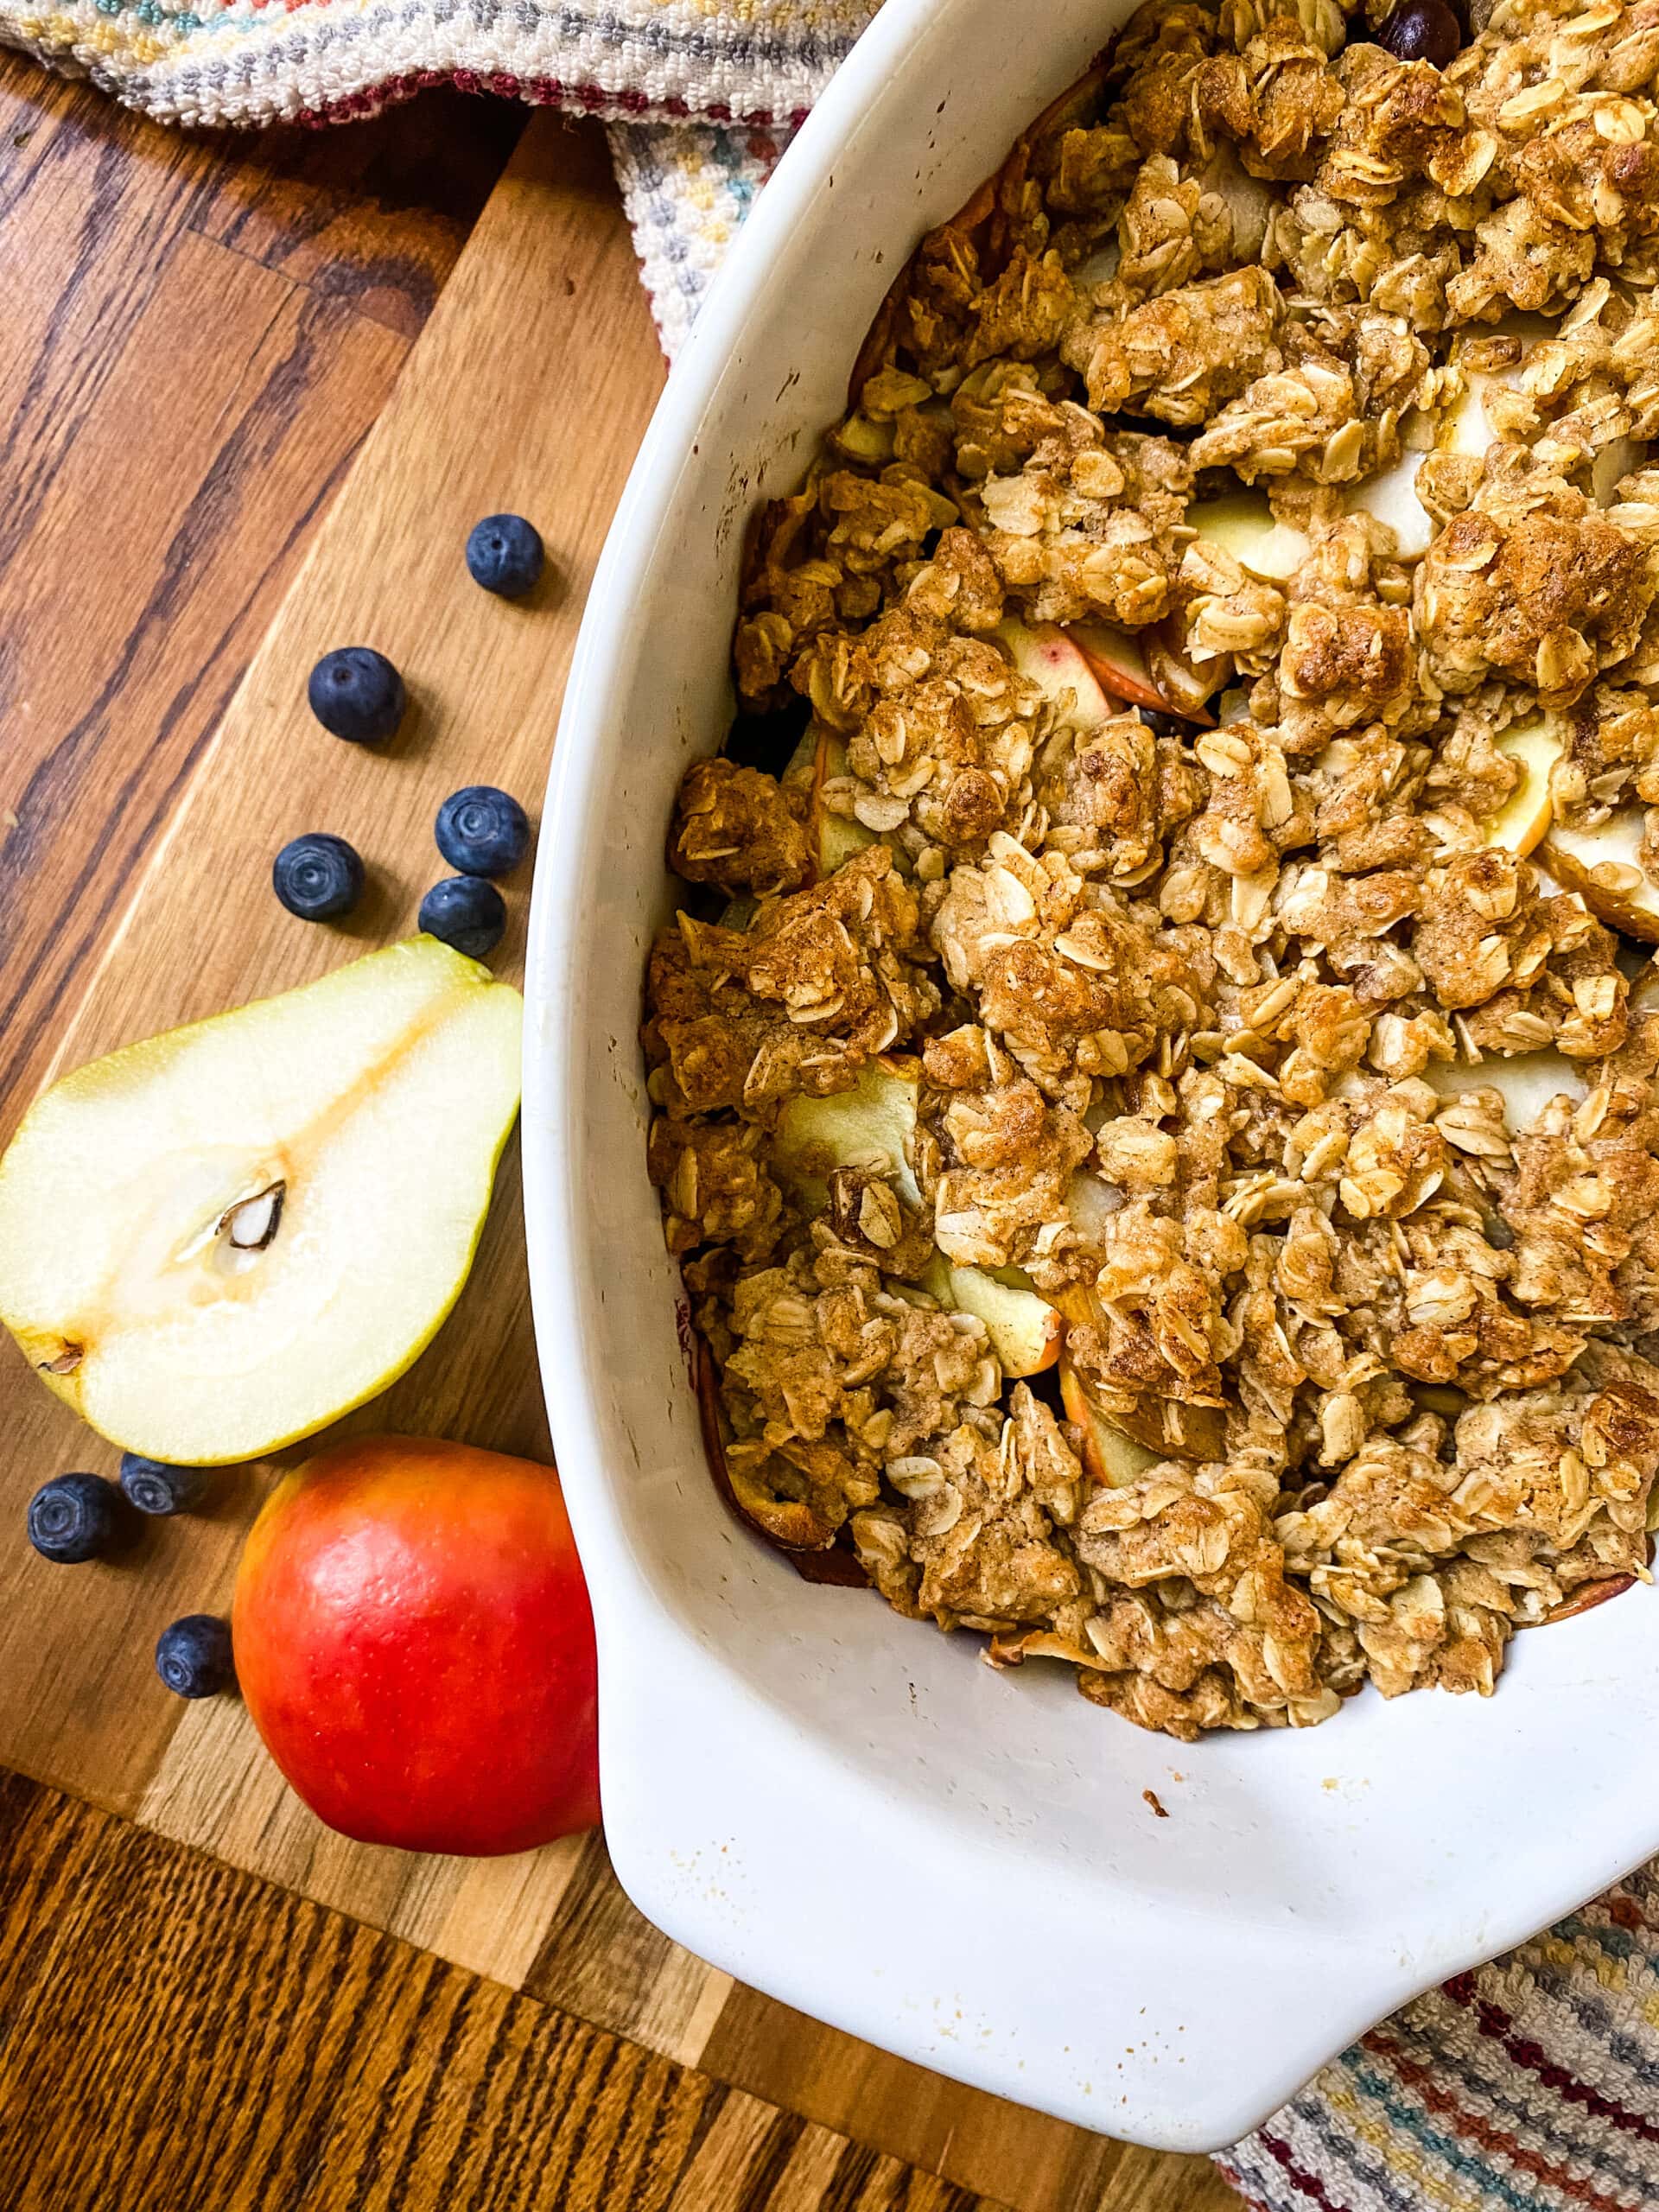 Apple, Pear, And Blueberry Crumble - Cooking With Fudge